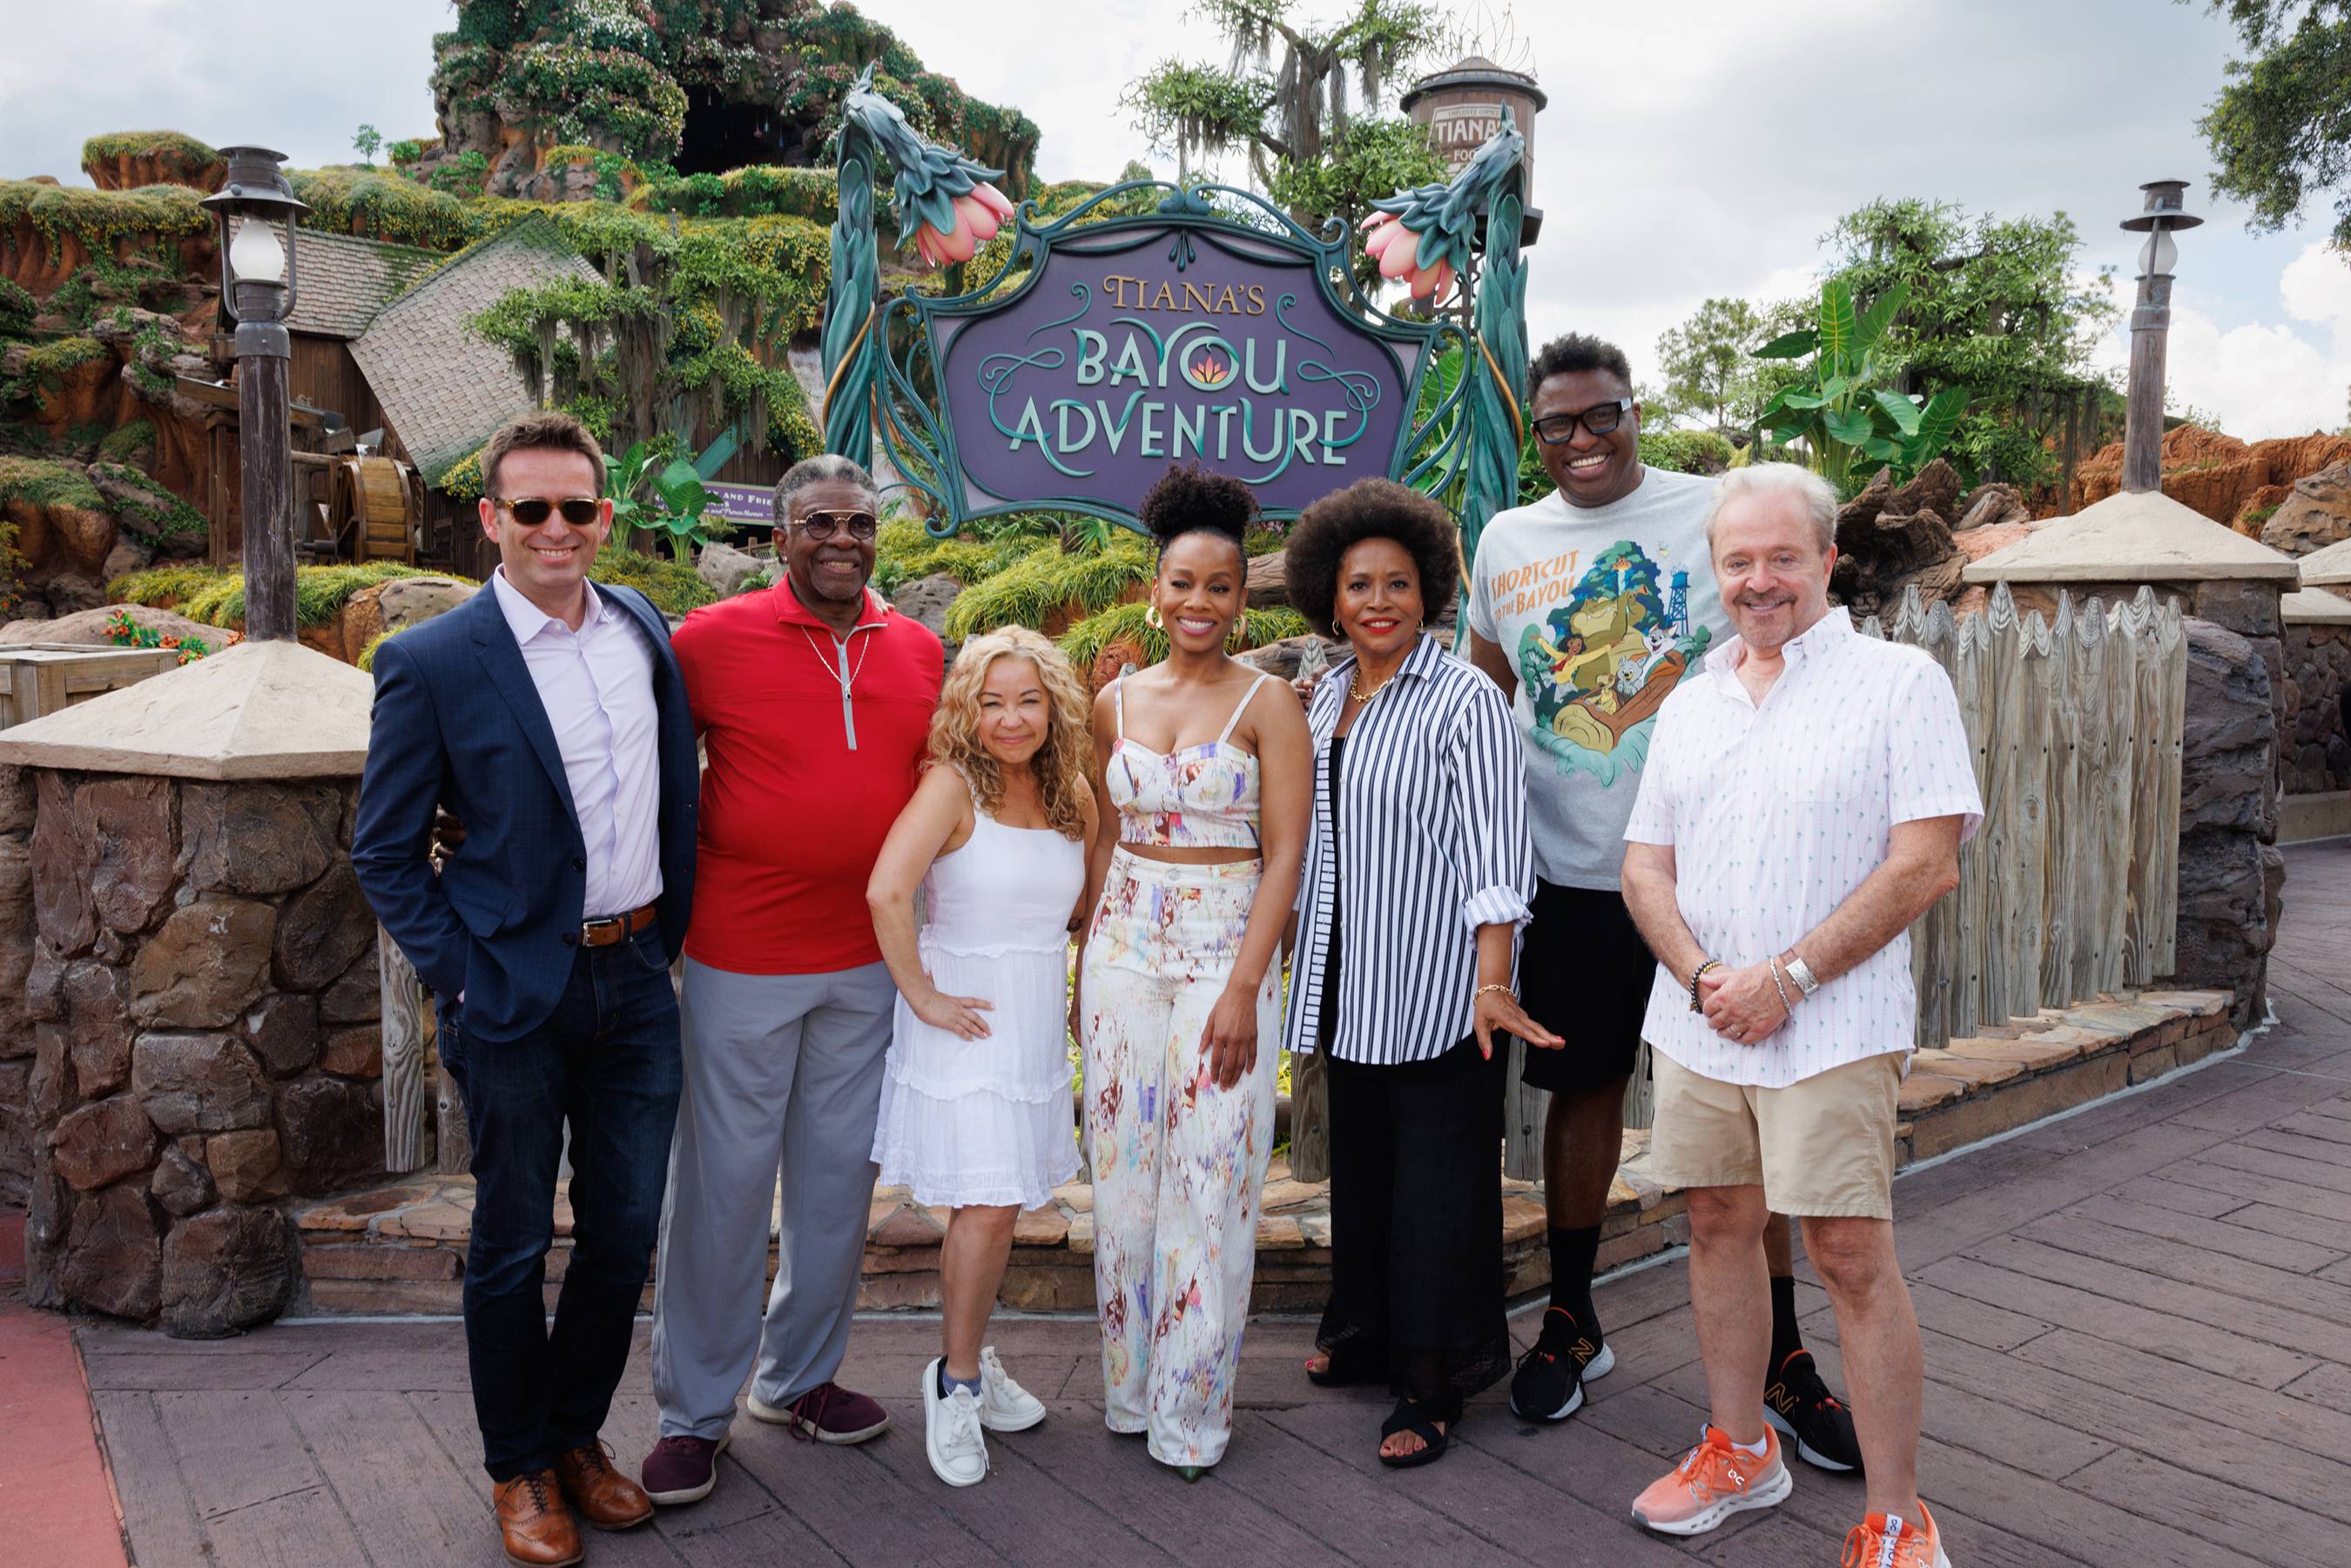 'The Princess and the Frog' Cast at Tiana's Bayou Adventure